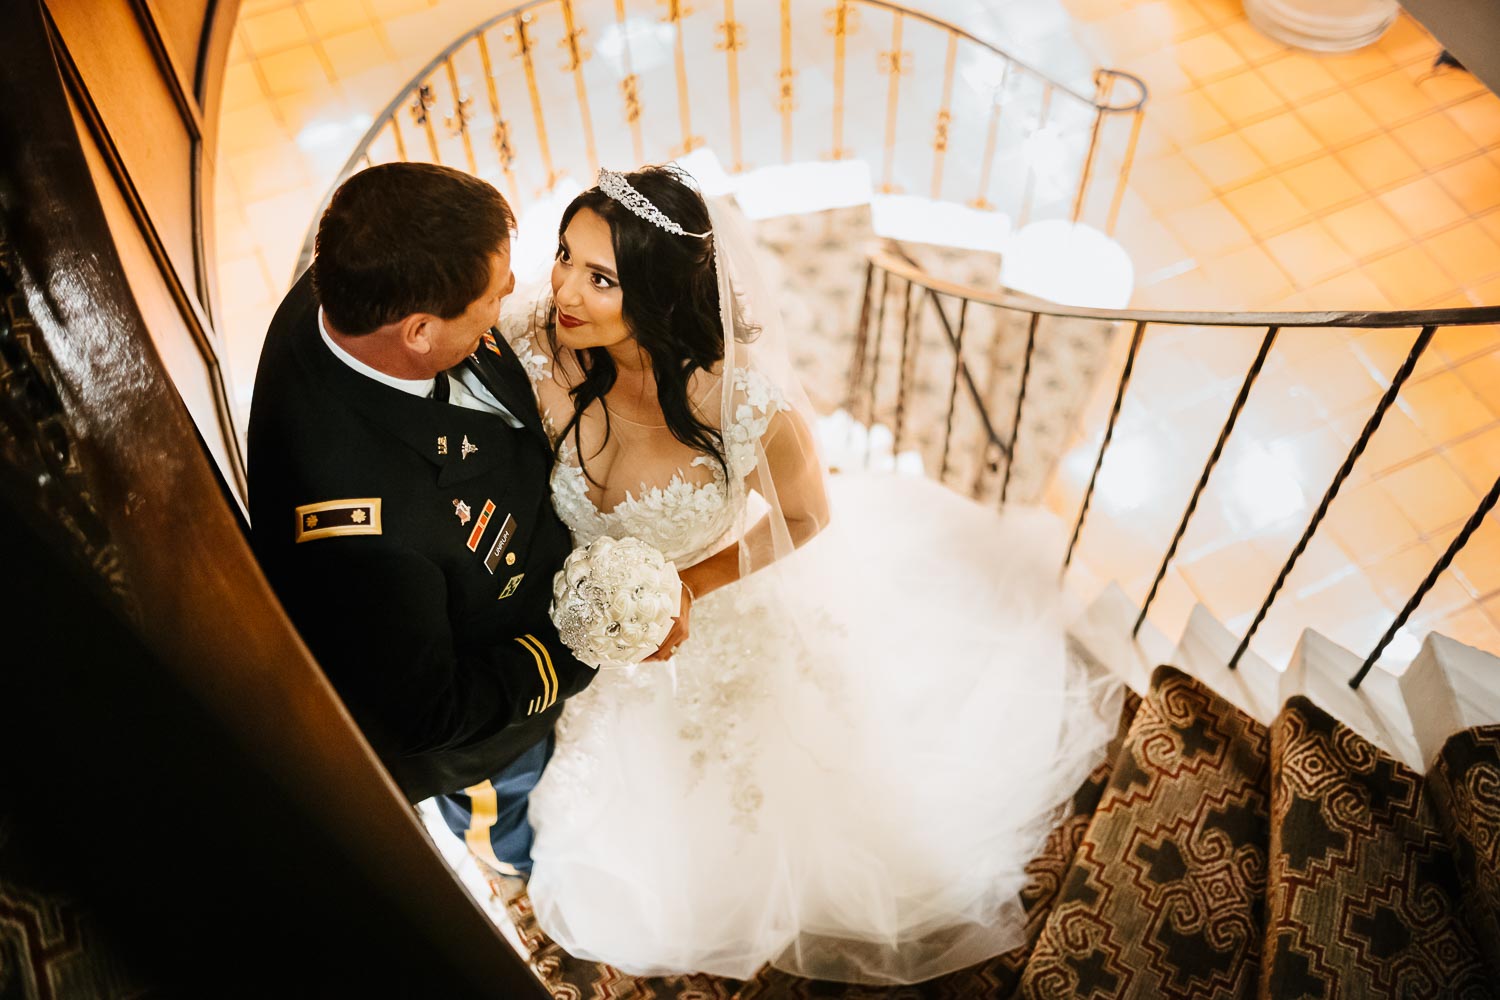 The couple on the famous staircase looking down following the spiral at Omni La Mansion Riverwalk hotel in San Antonio Texas